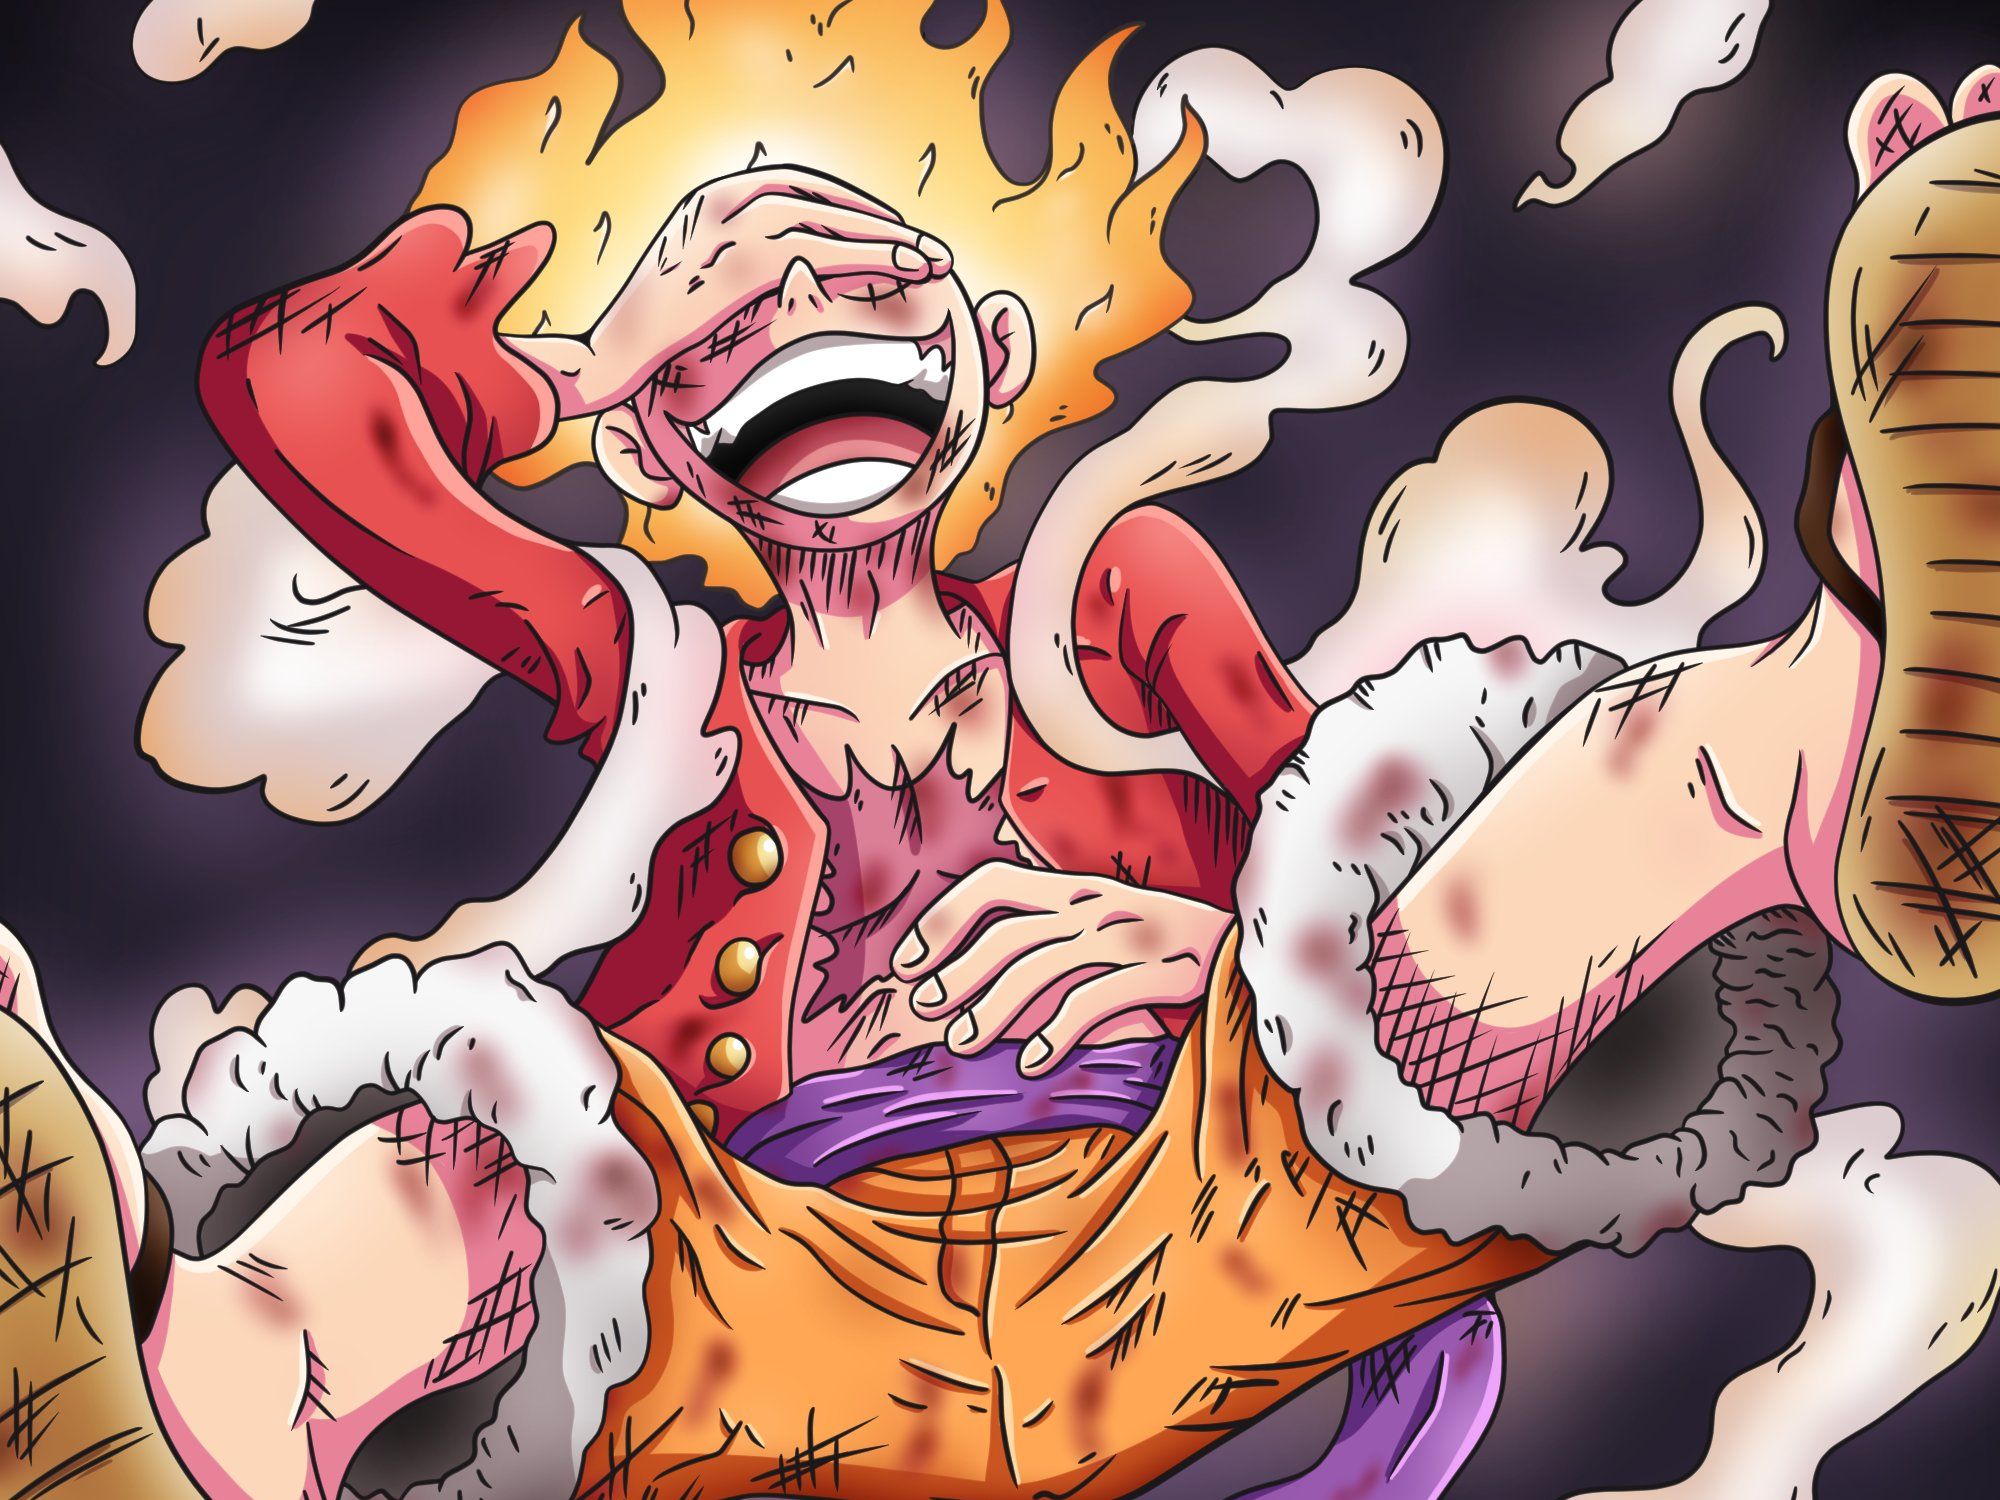 Gear 5 (One Piece) wallpapers for desktop, download free Gear 5 (One Piece)  pictures and backgrounds for PC 